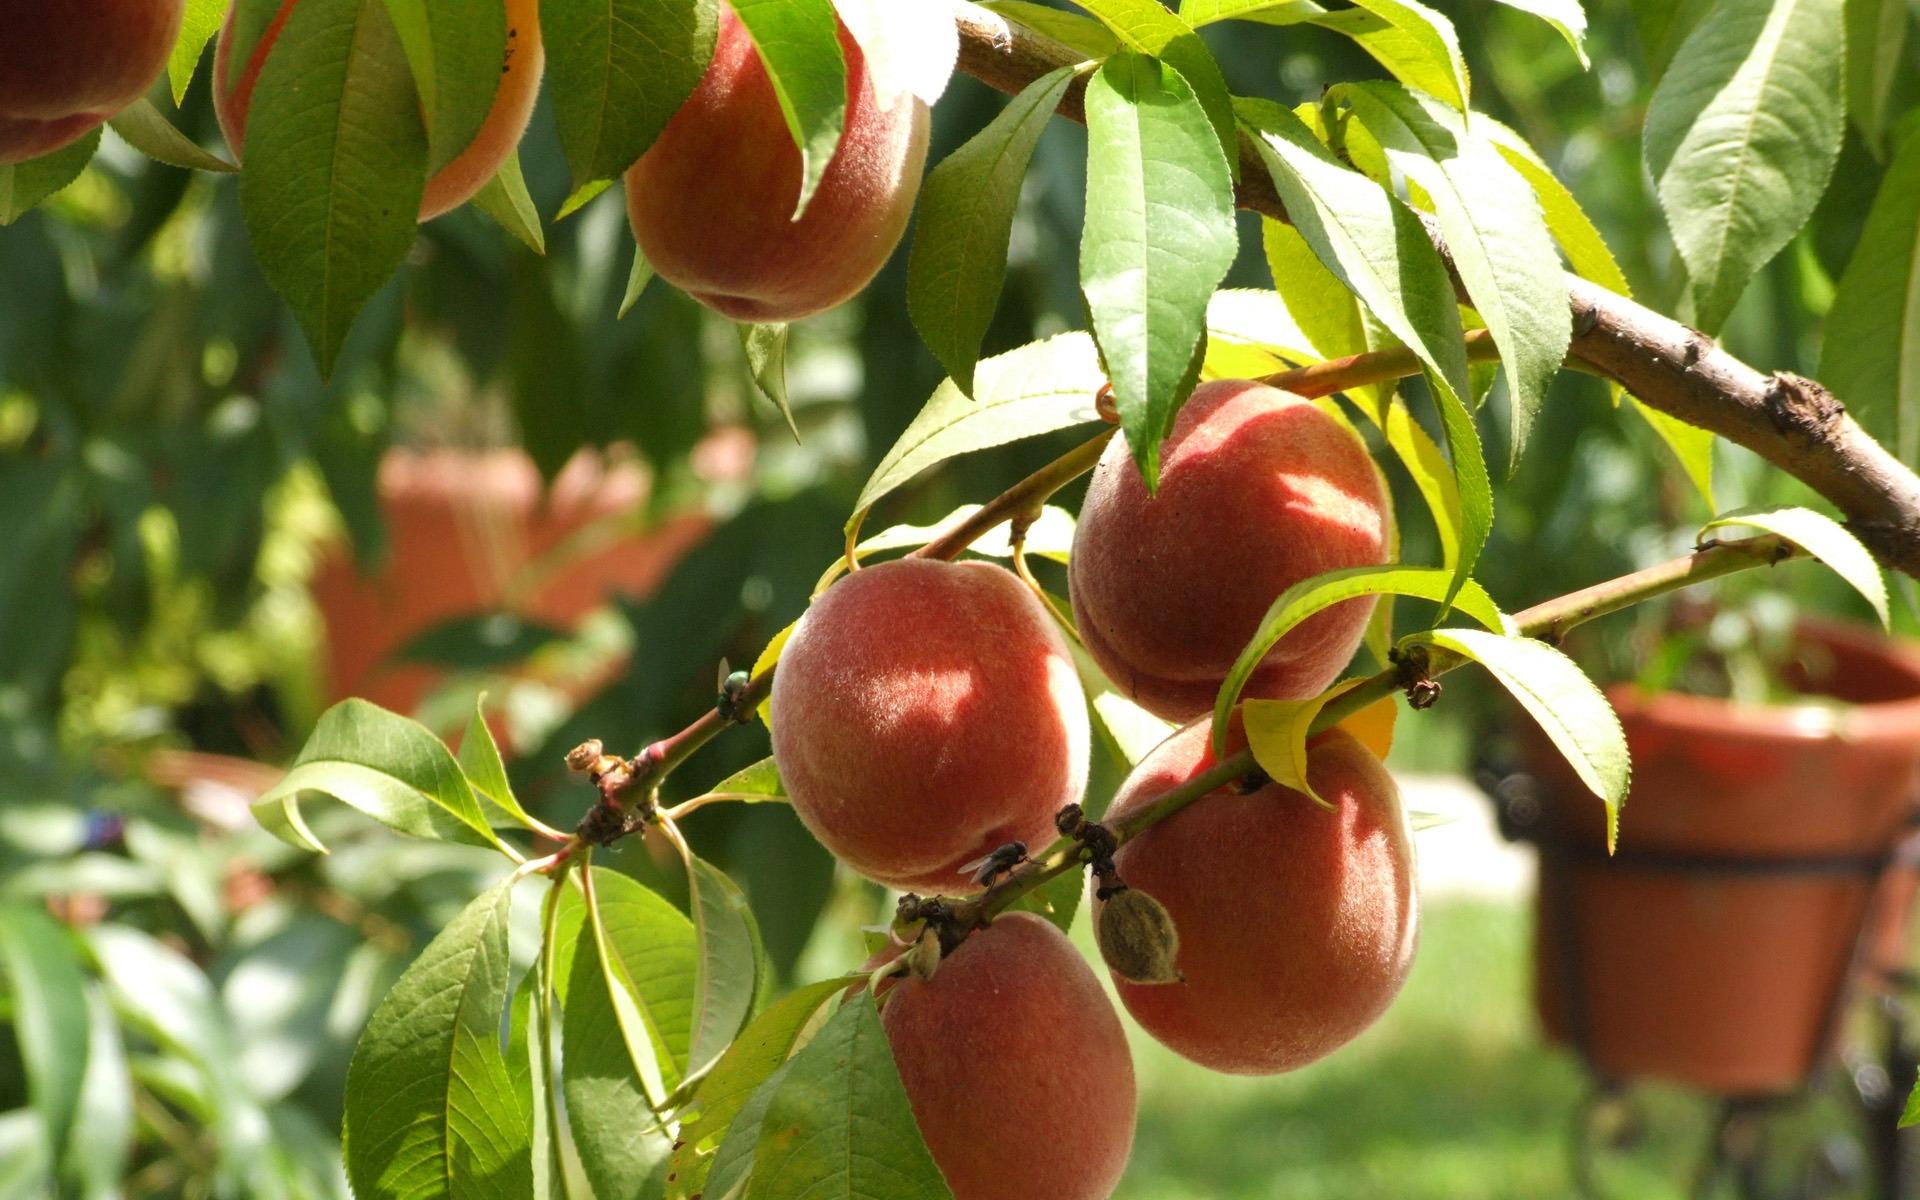 Peaches Wallpaper Fruits Nature Wallpaper in jpg format for free